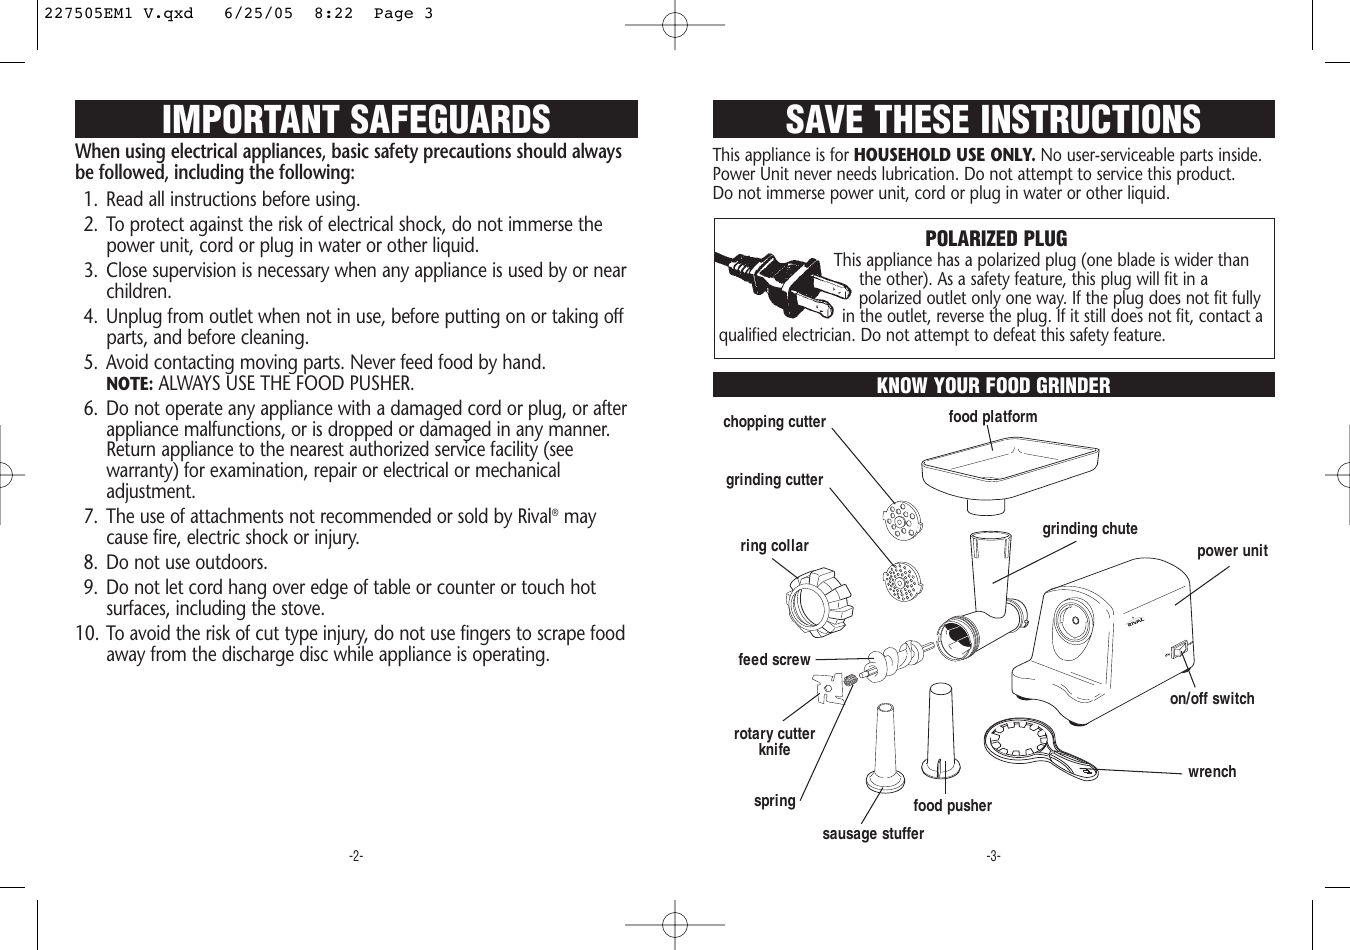 Page 2 of 6 - Rival Rival-Food-Grinder-Users-Manual- 227505EM1 V  Rival-food-grinder-users-manual